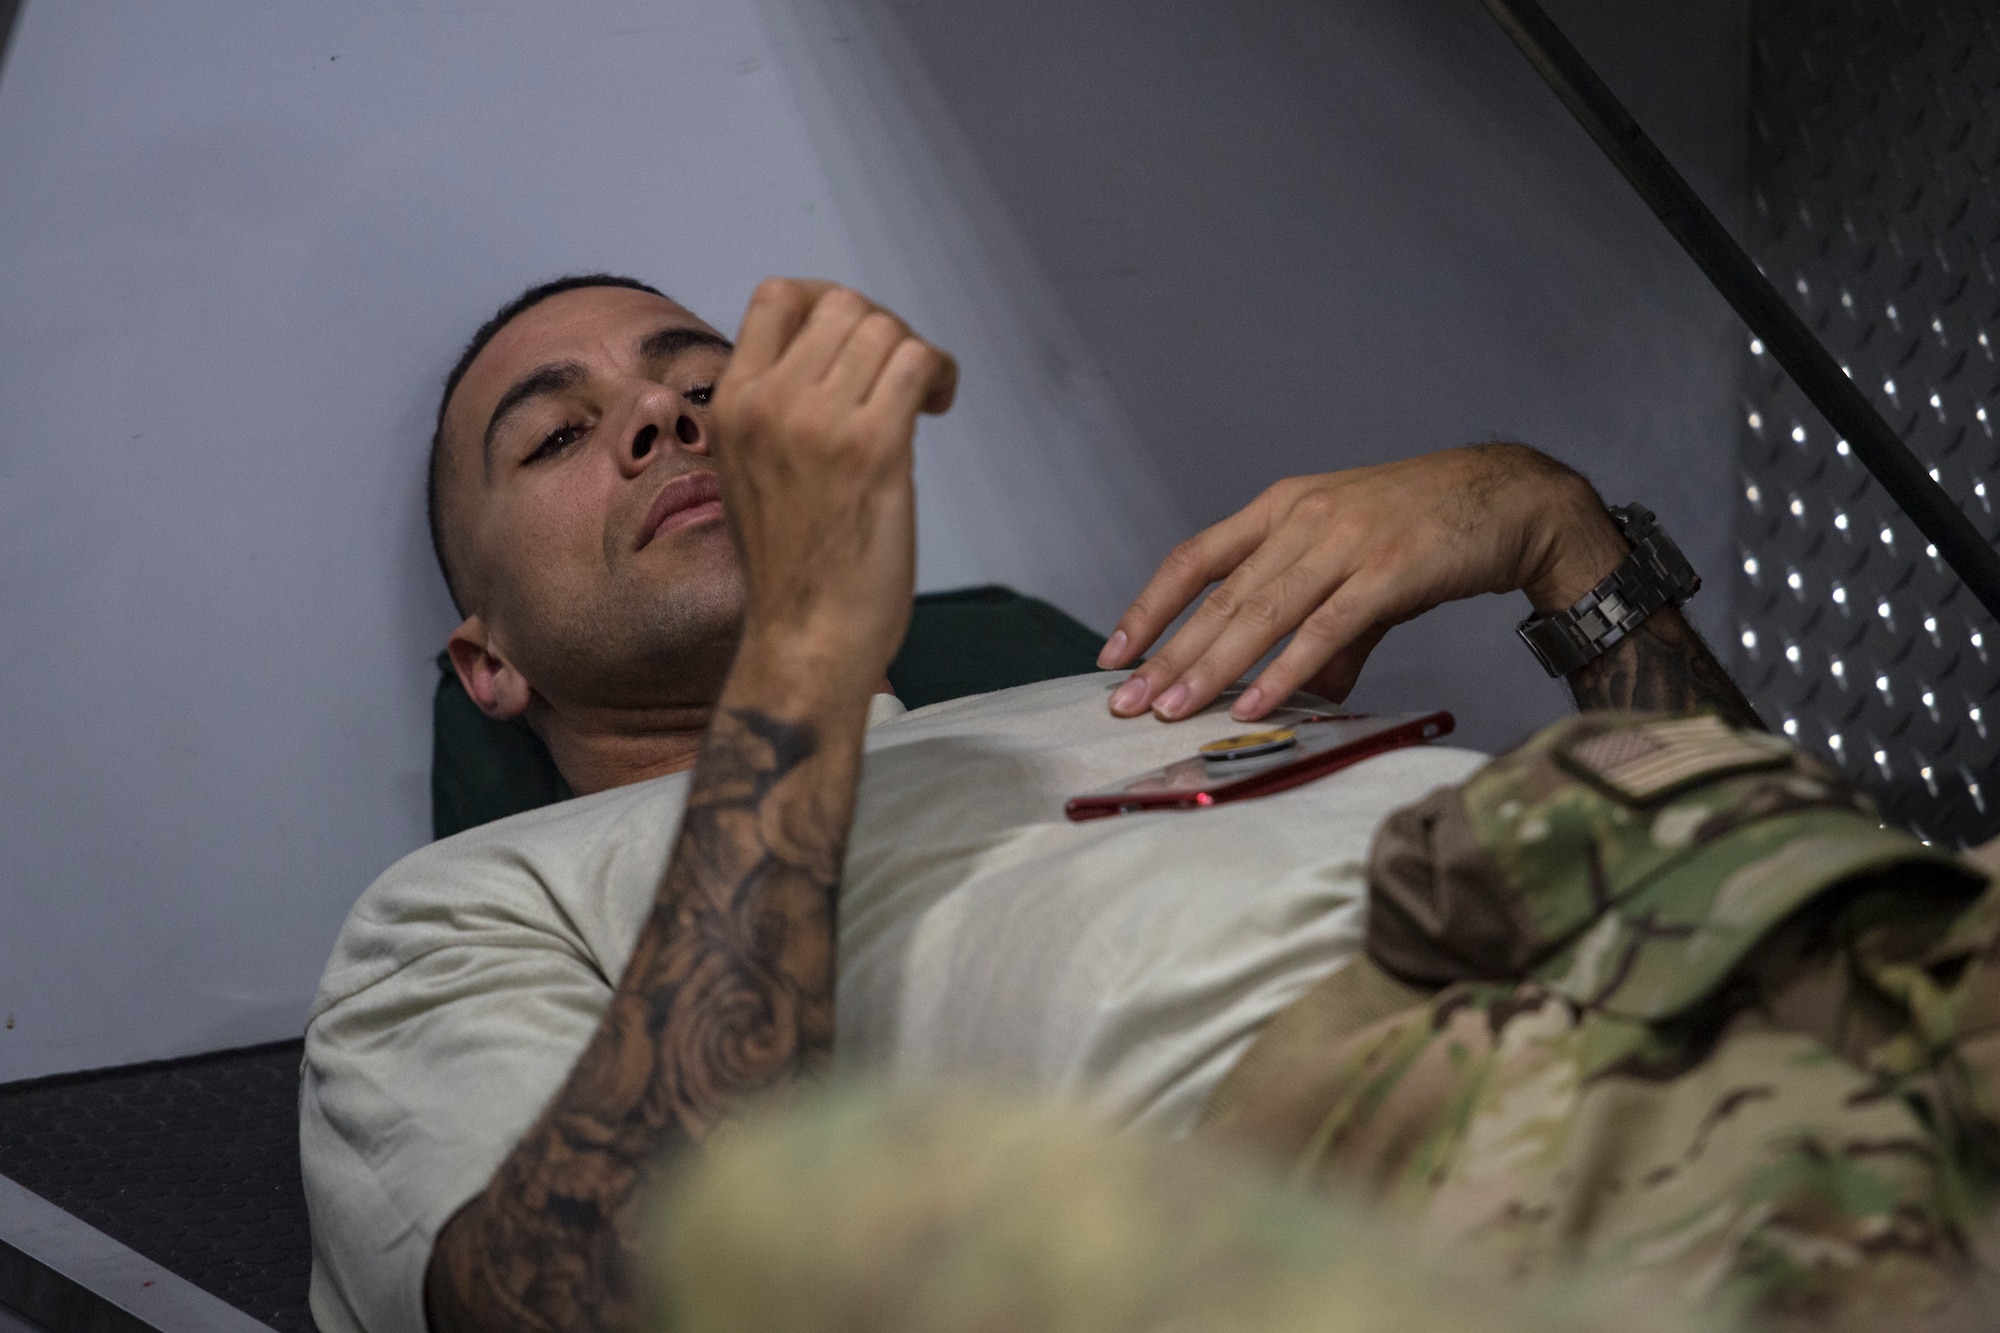 Senior Master Sgt. Andrew Griggs, 41st Rescue Squadron (RQS) superintendent, takes a break before a mission, Aug. 17, 2018, at Patrick Air Force Base, Fla. Airmen from the 41st RQS and 41st Helicopter Maintenance Unit traveled to Patrick AFB to participate in a spin-up exercise. During the exercise, Airmen faced scenarios and situations they may encounter downrange. (U.S. Air Force photo by Senior Airman Janiqua P. Robinson)